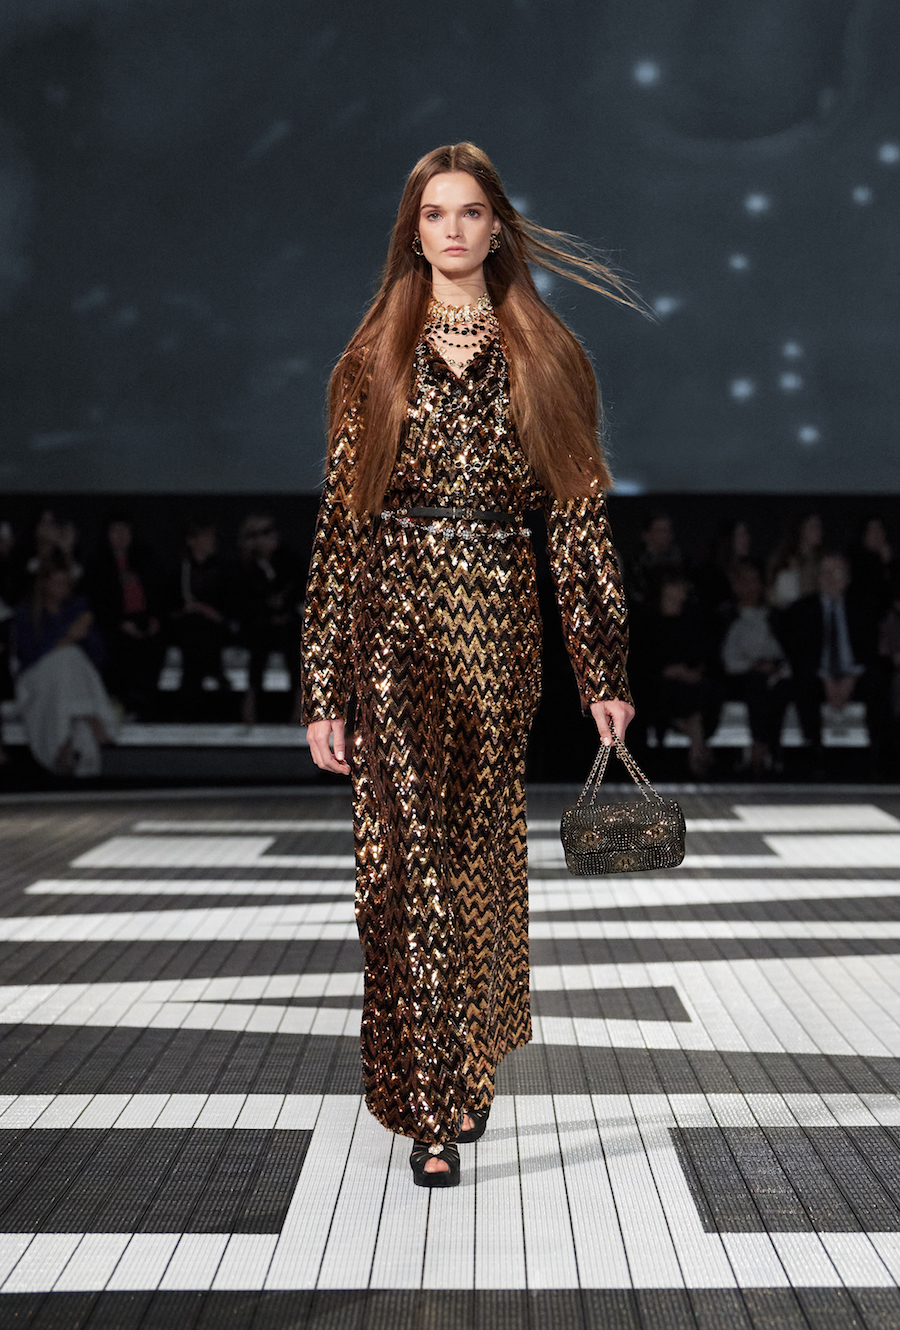 CHANEL Cruise 2023/24 collection: my 7 favourite looks